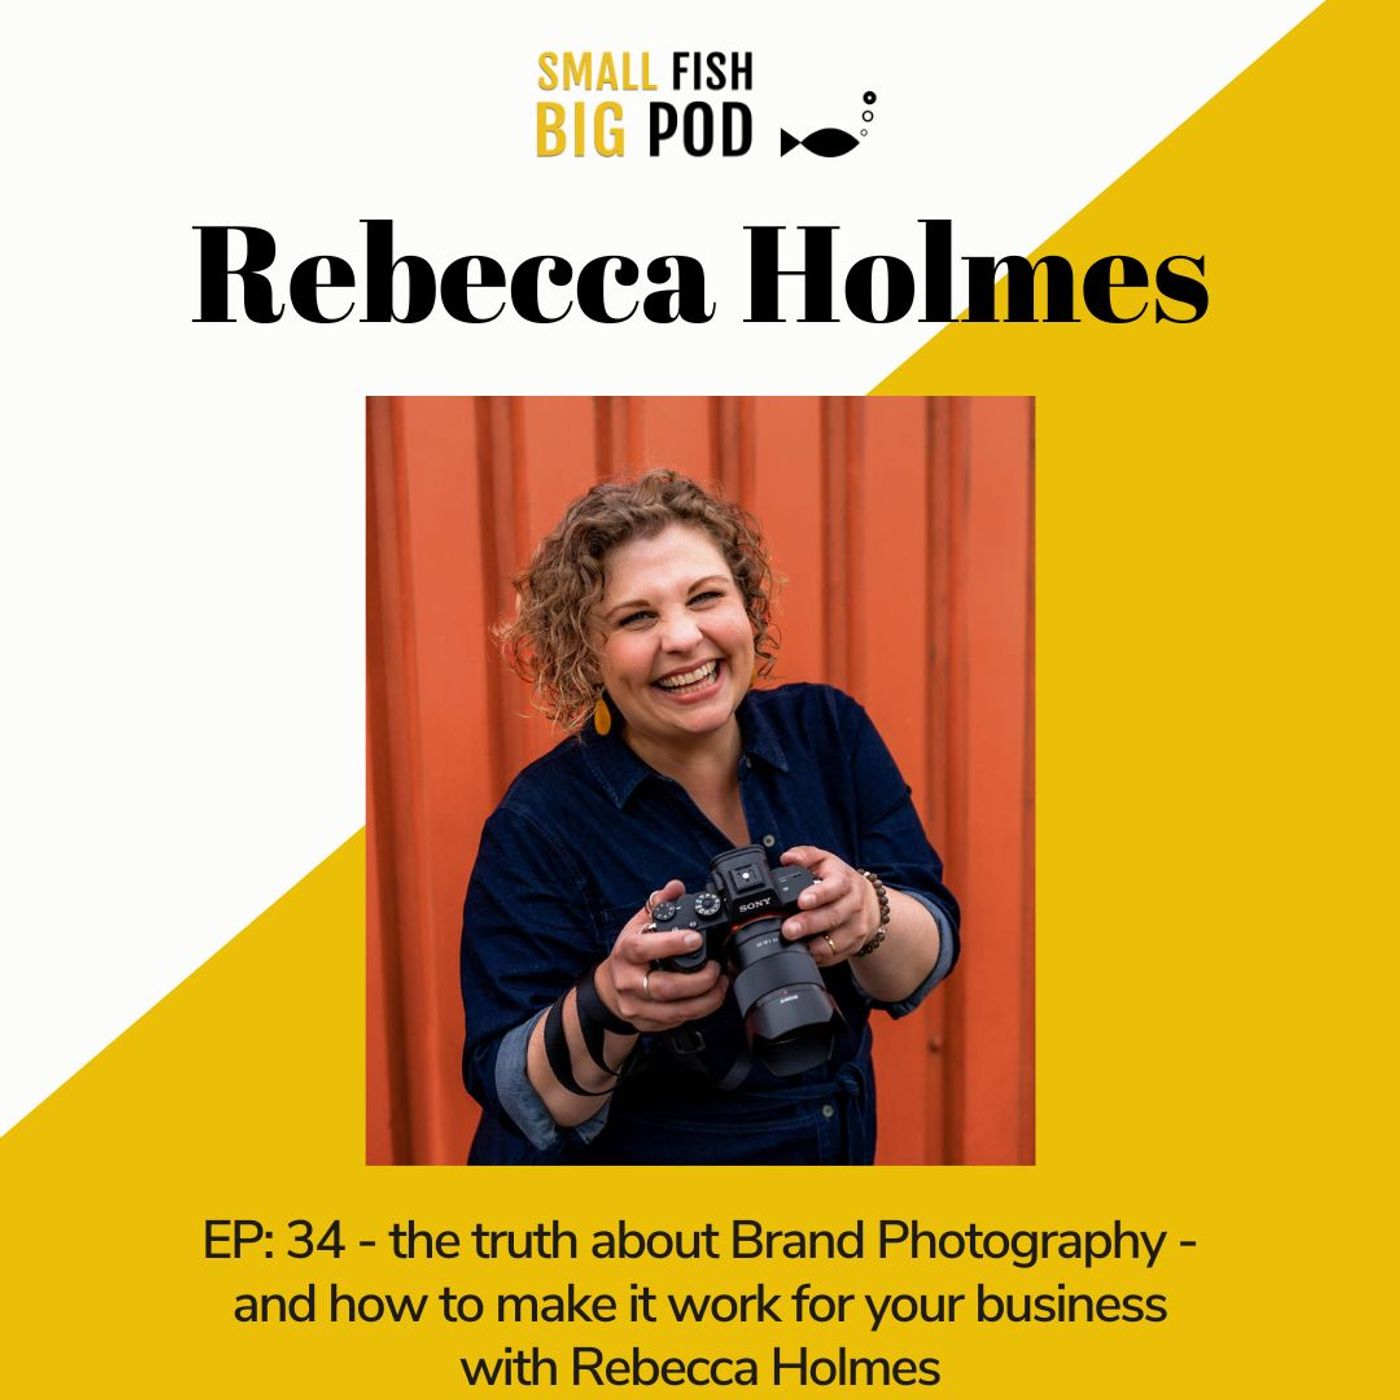 EP 34: The truth about Brand Photography- and how to make it work for your business with Rebecca Holmes